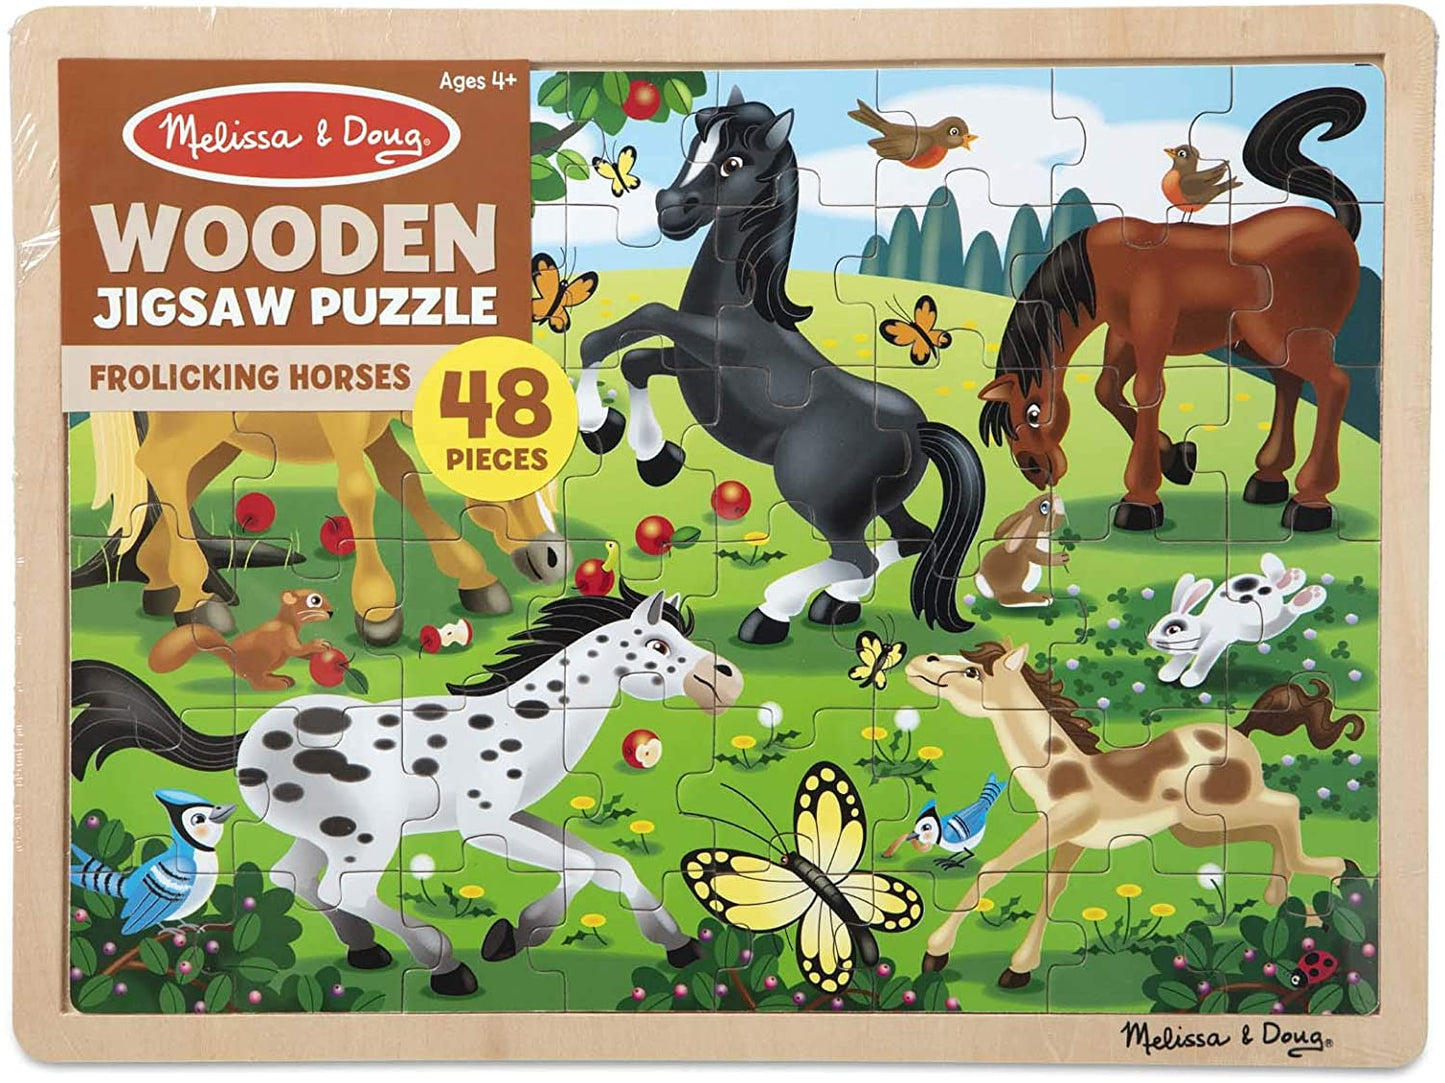 Frolicking Horses 48pc Wooden Jigsaw Puzzle